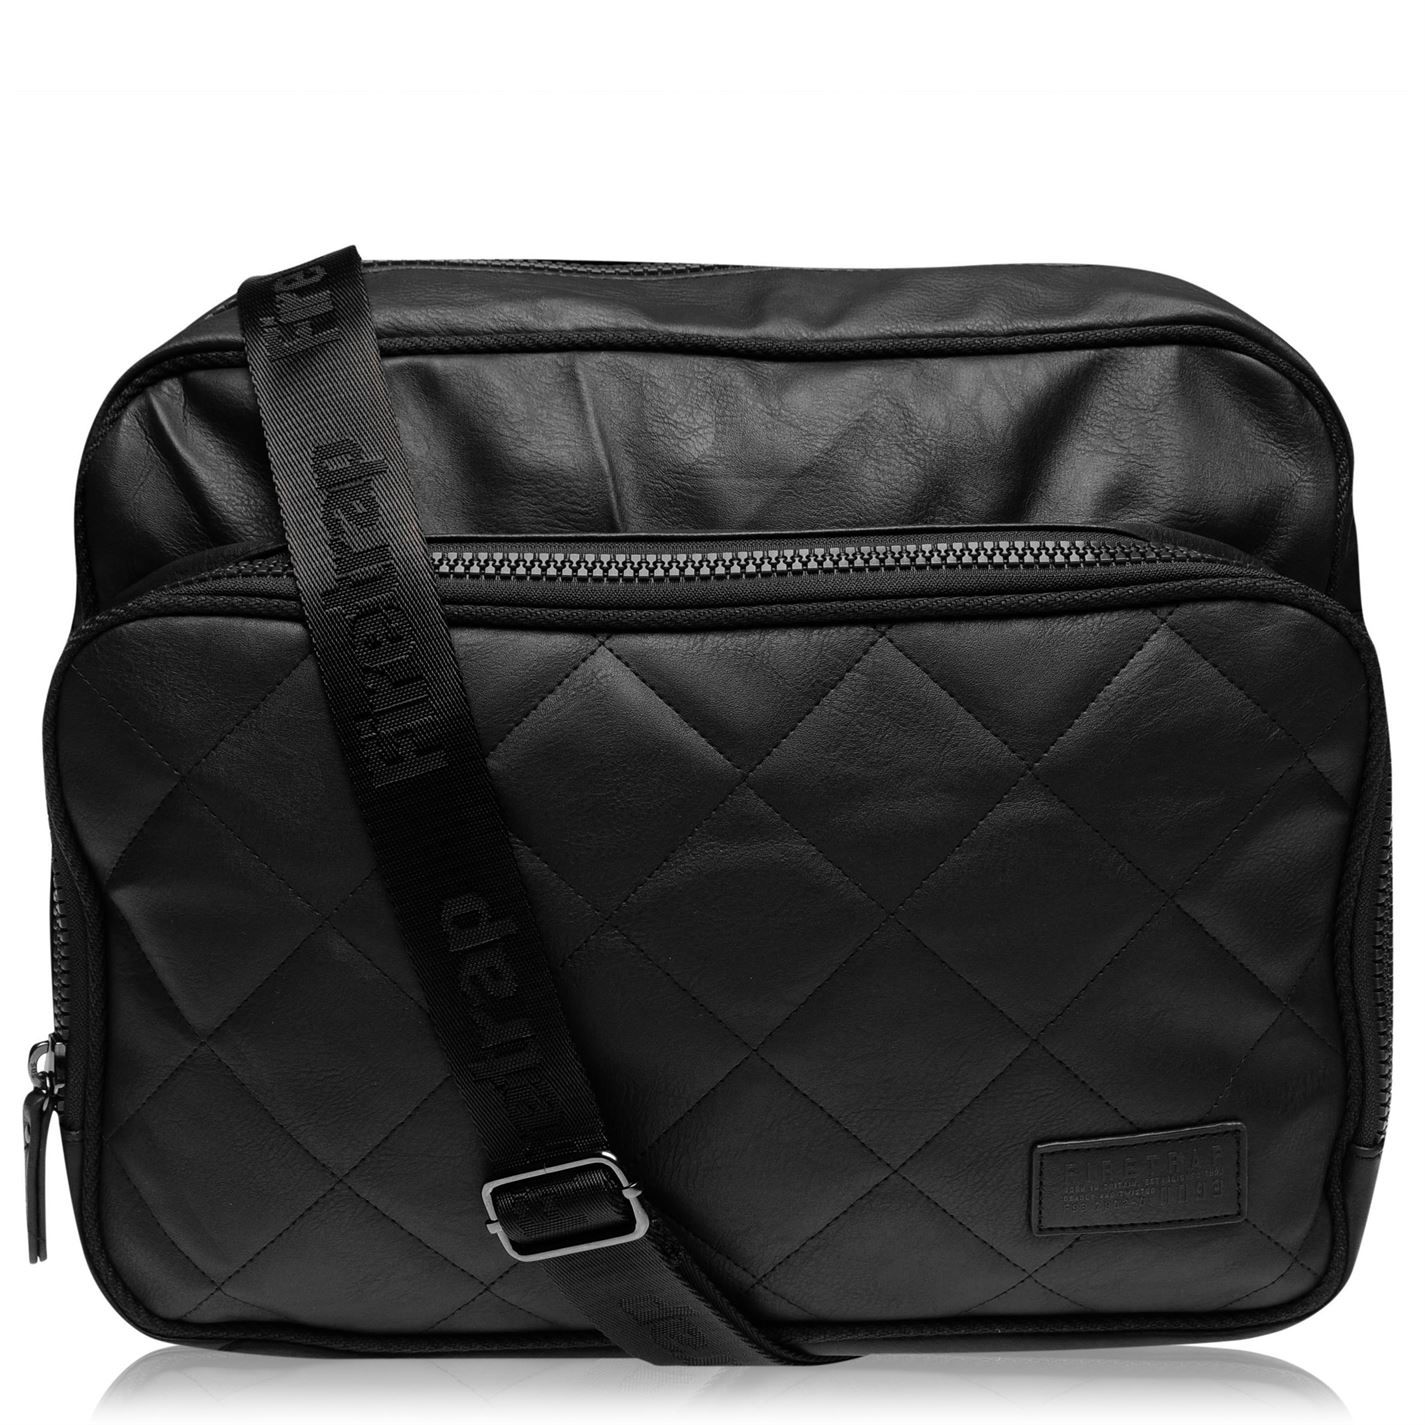 <strong>Firetrap Quilted Flight Bag</strong><br><br> Travel with ease with the Firetrap Quilted Flight Bag over your shoulder. The ideal size for storing your travel documents and valuables, the quilted construct features a main zip compartment, with a front and back zip pocket. The bag has a Firetrap branded shoulder strap for logo to the front for brand recognition.<br>> Flight bag<br>> Main zip fastening<br>> Front zip compartment<br>> Quilted construct<br>> Firetrap branded shoulder strap<br>> Back zip compartment<br>> Firetrap branding<br>> 100% PVC<br>> Hand wash only<br>> H 30 x W 36 x D 12 cm